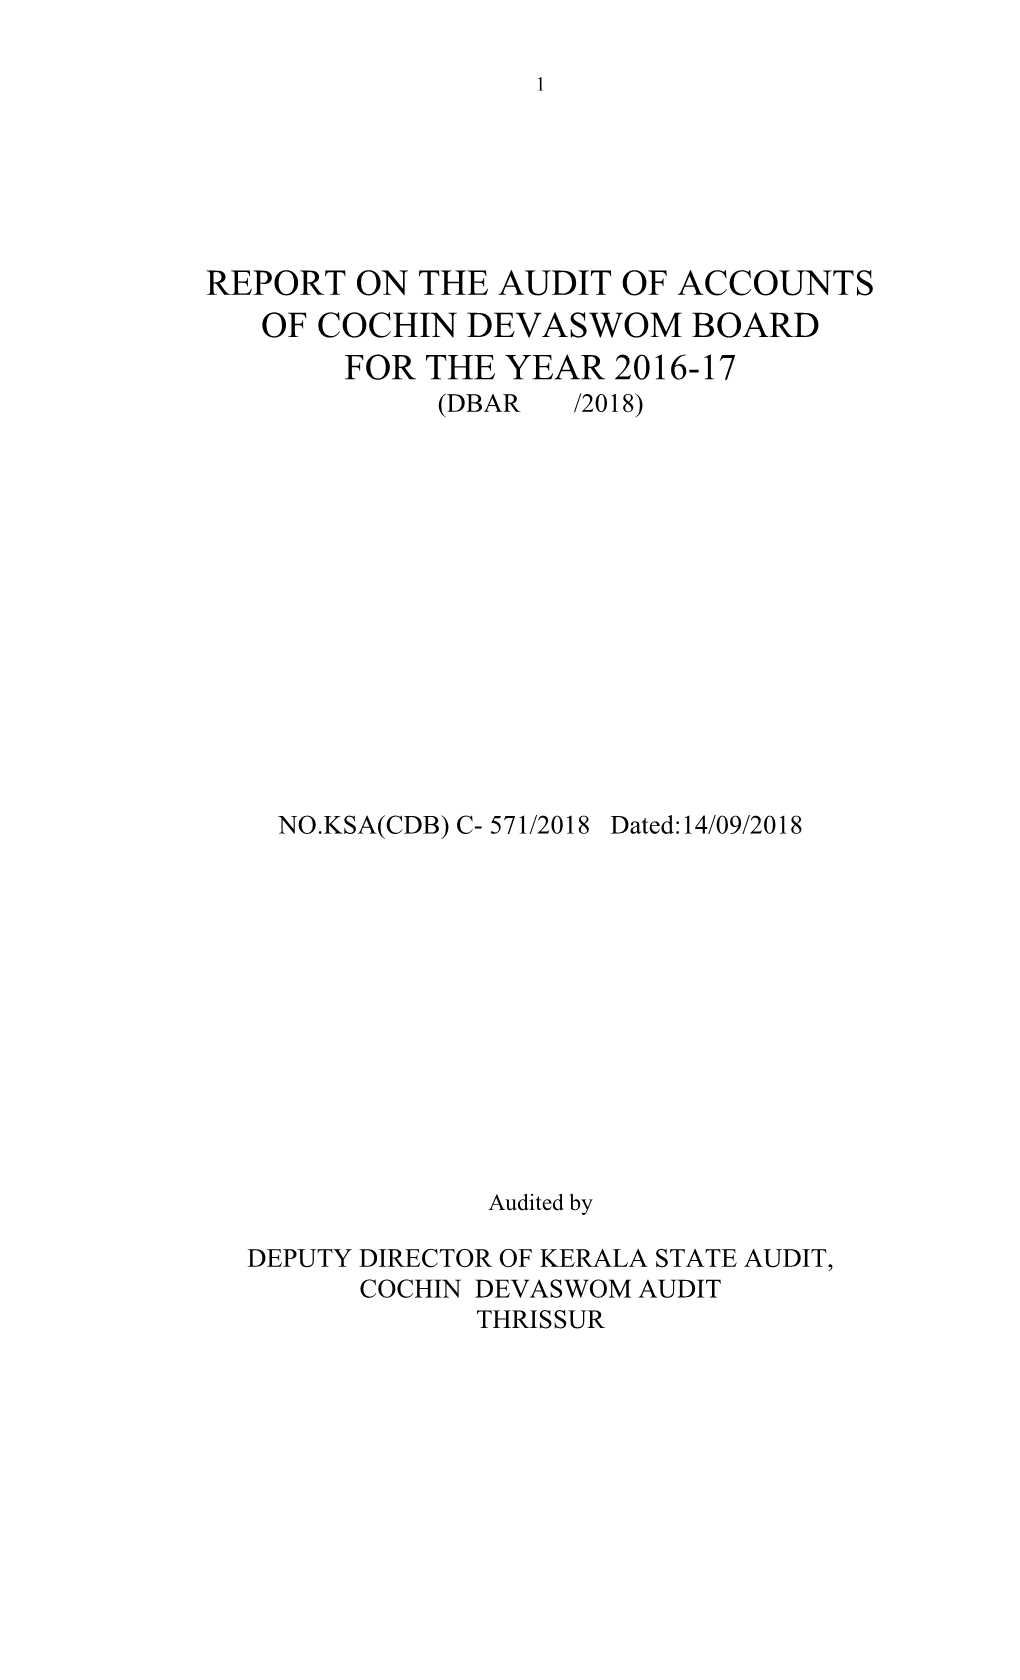 Report on the Audit of Accounts of Cochin Devaswom Board for the Year 2016-17 (Dbar /2018)